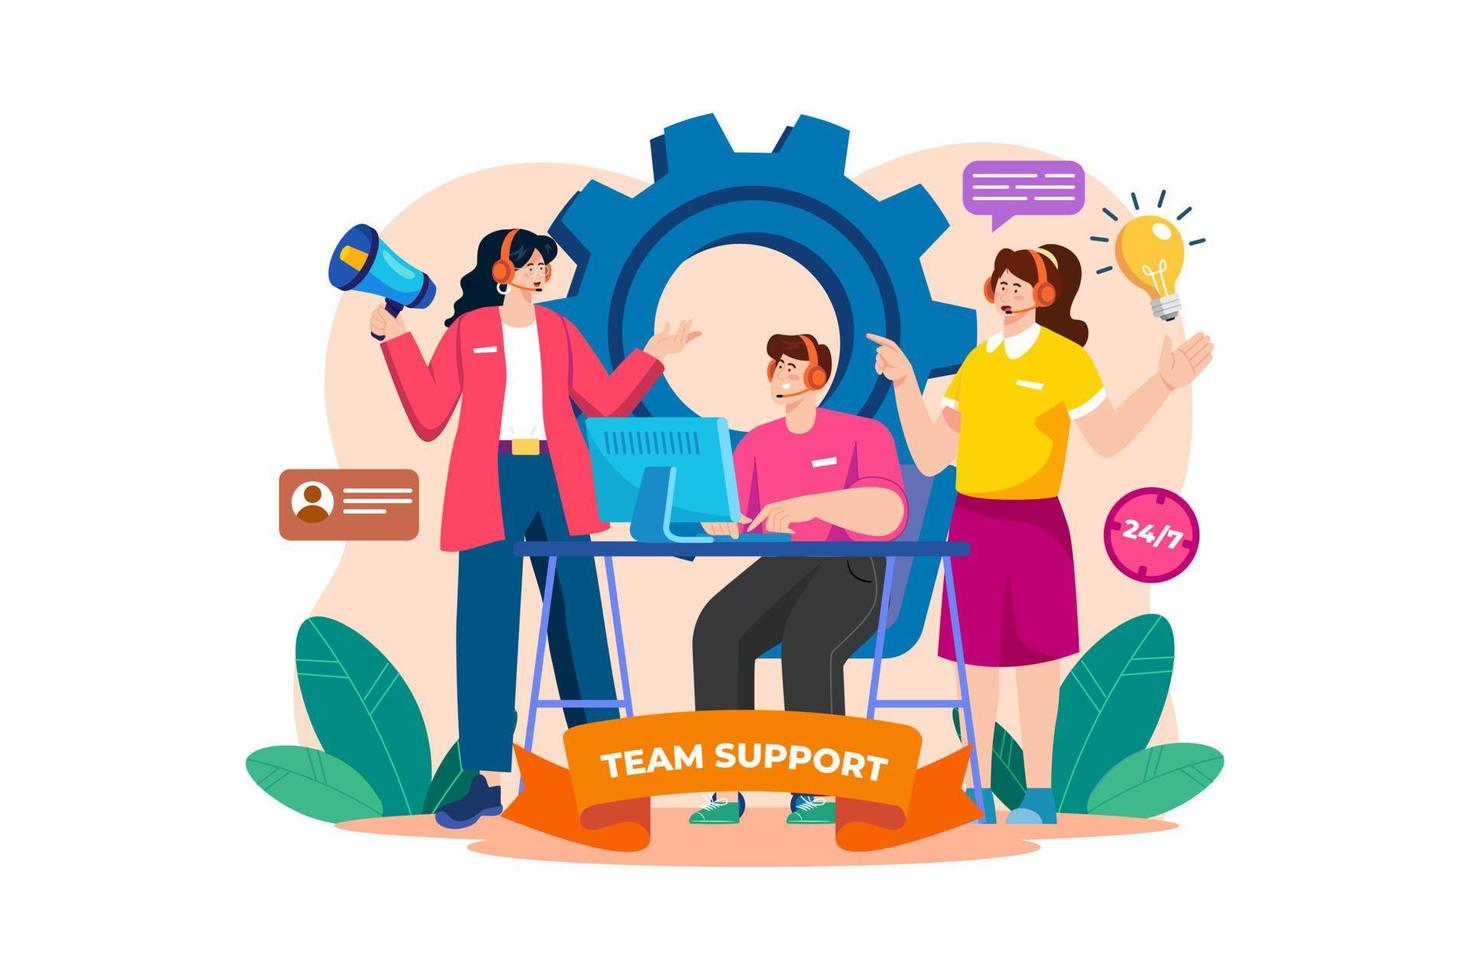 Team Support Department Advises The Customer's Office Workers. vector